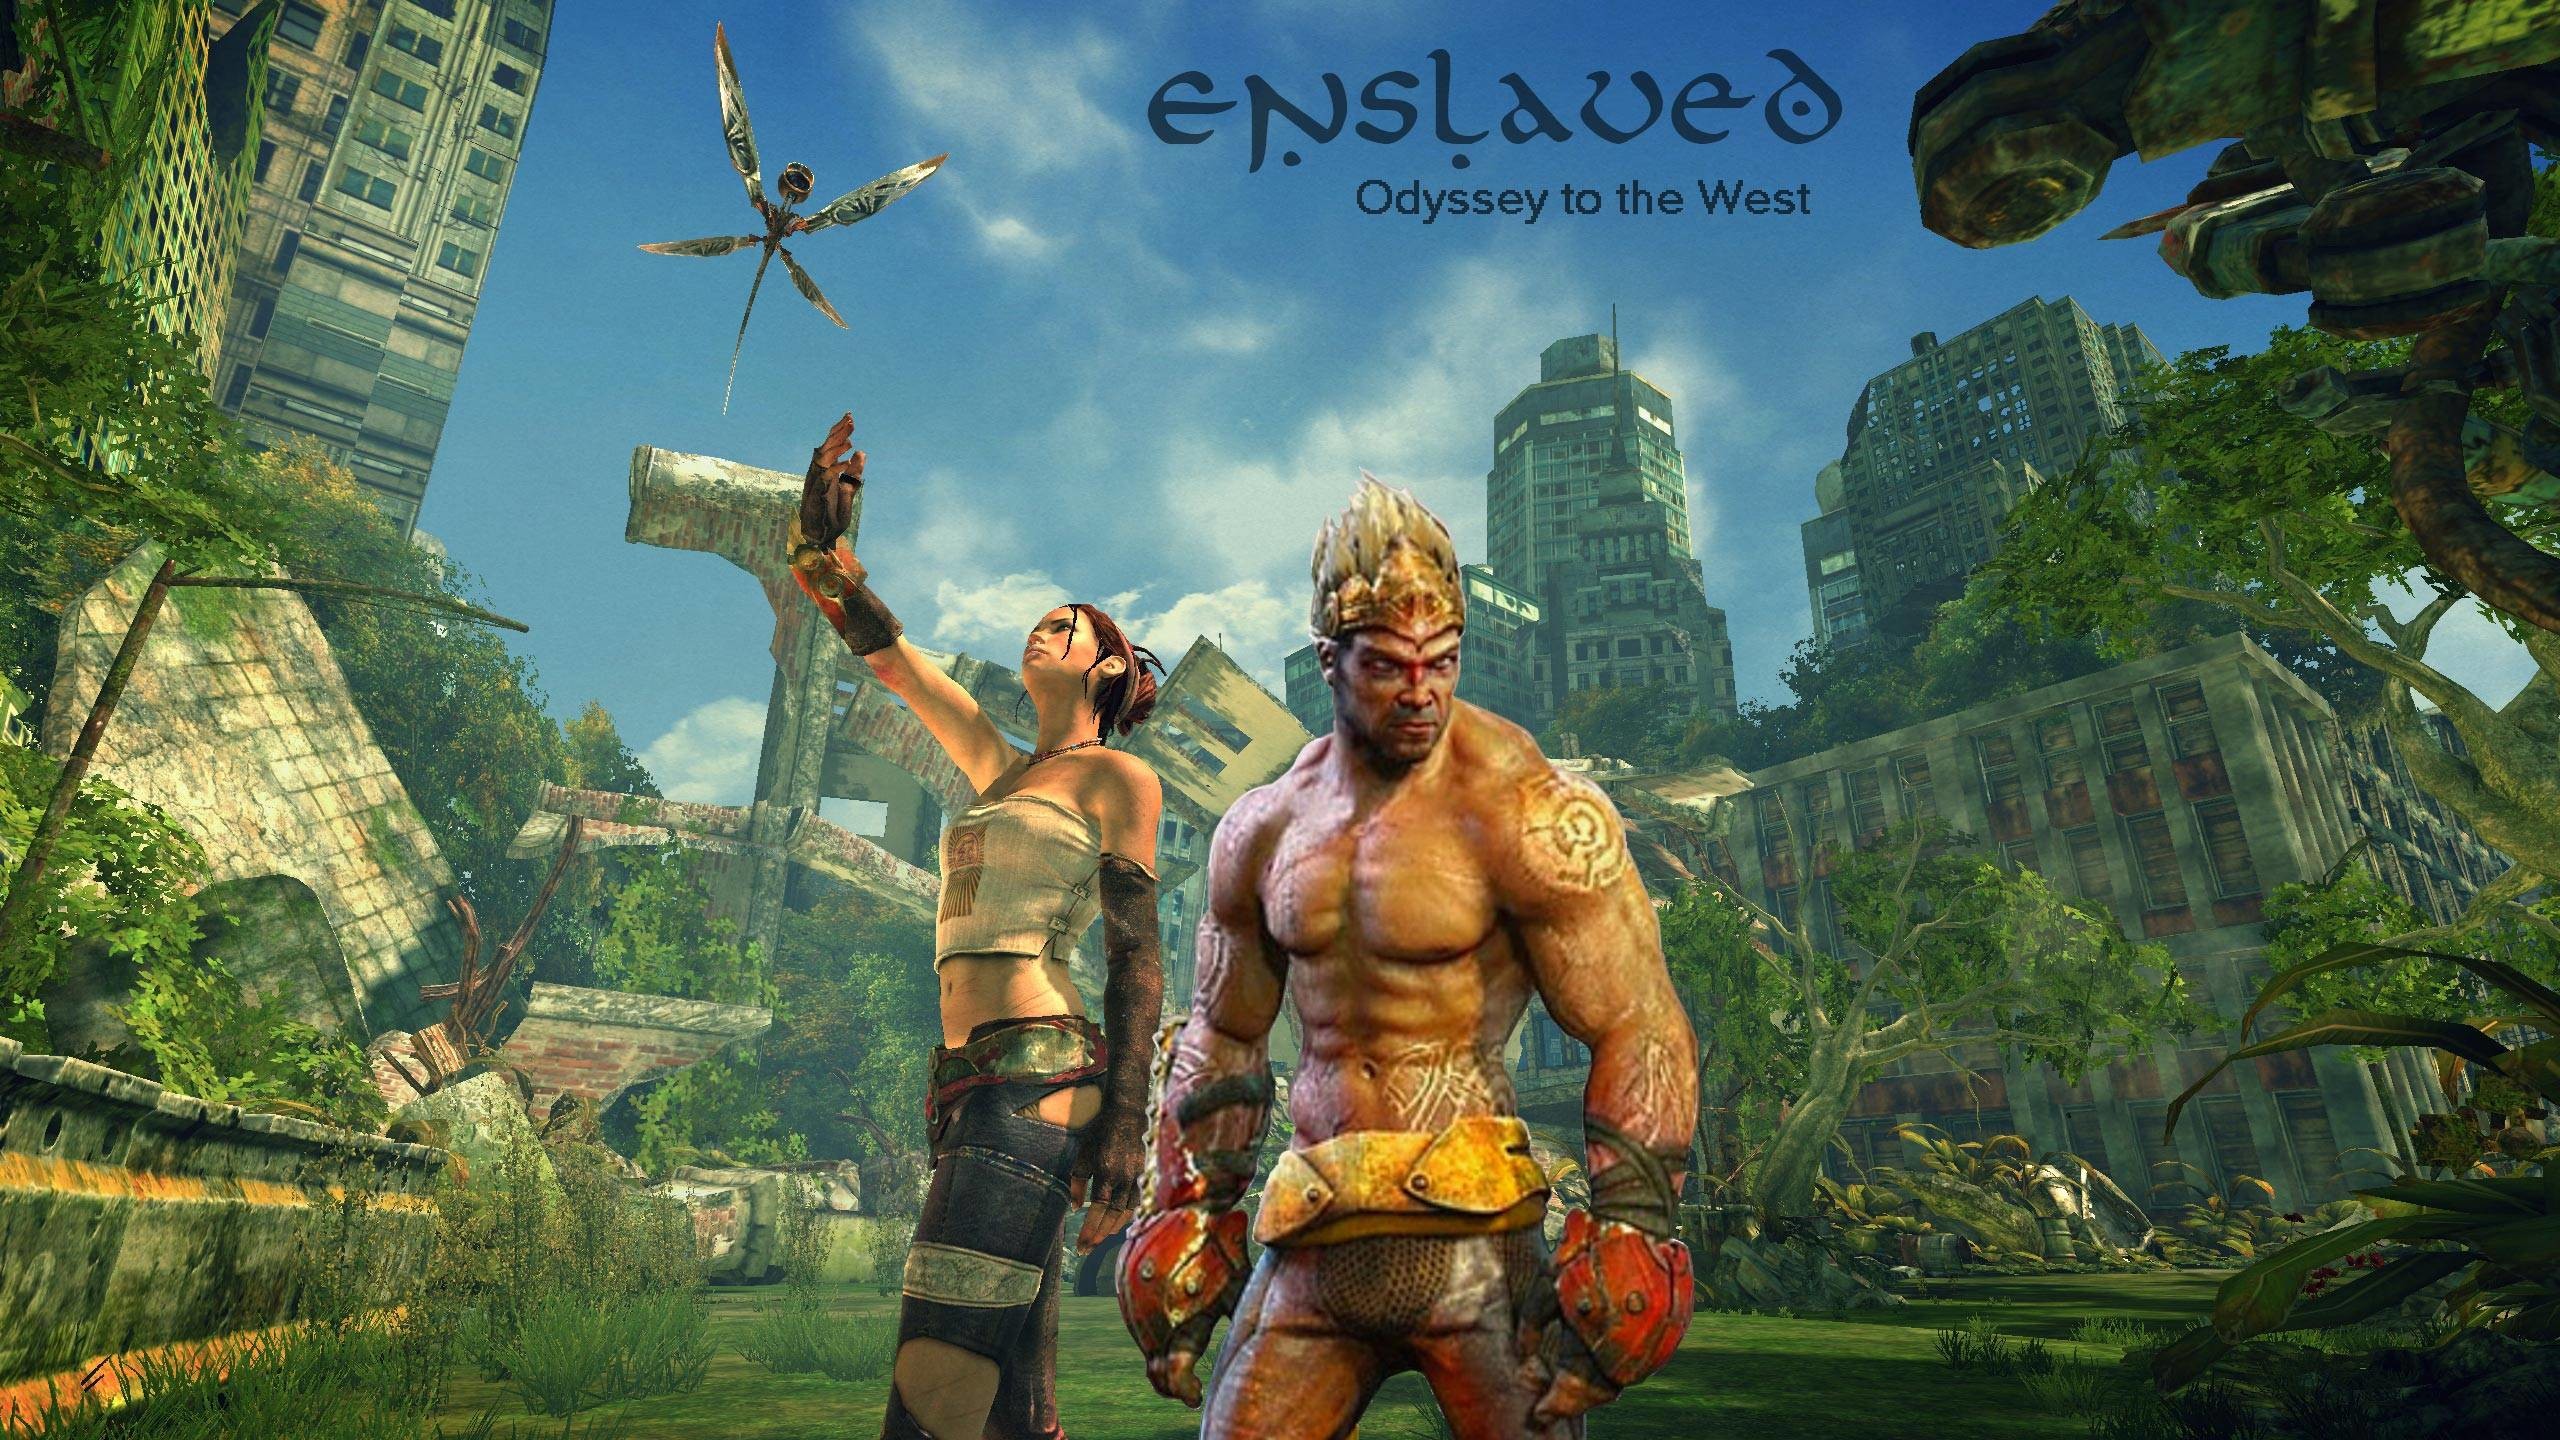 2560x1440 Games Wallpapers - Free enslaved wallpapers